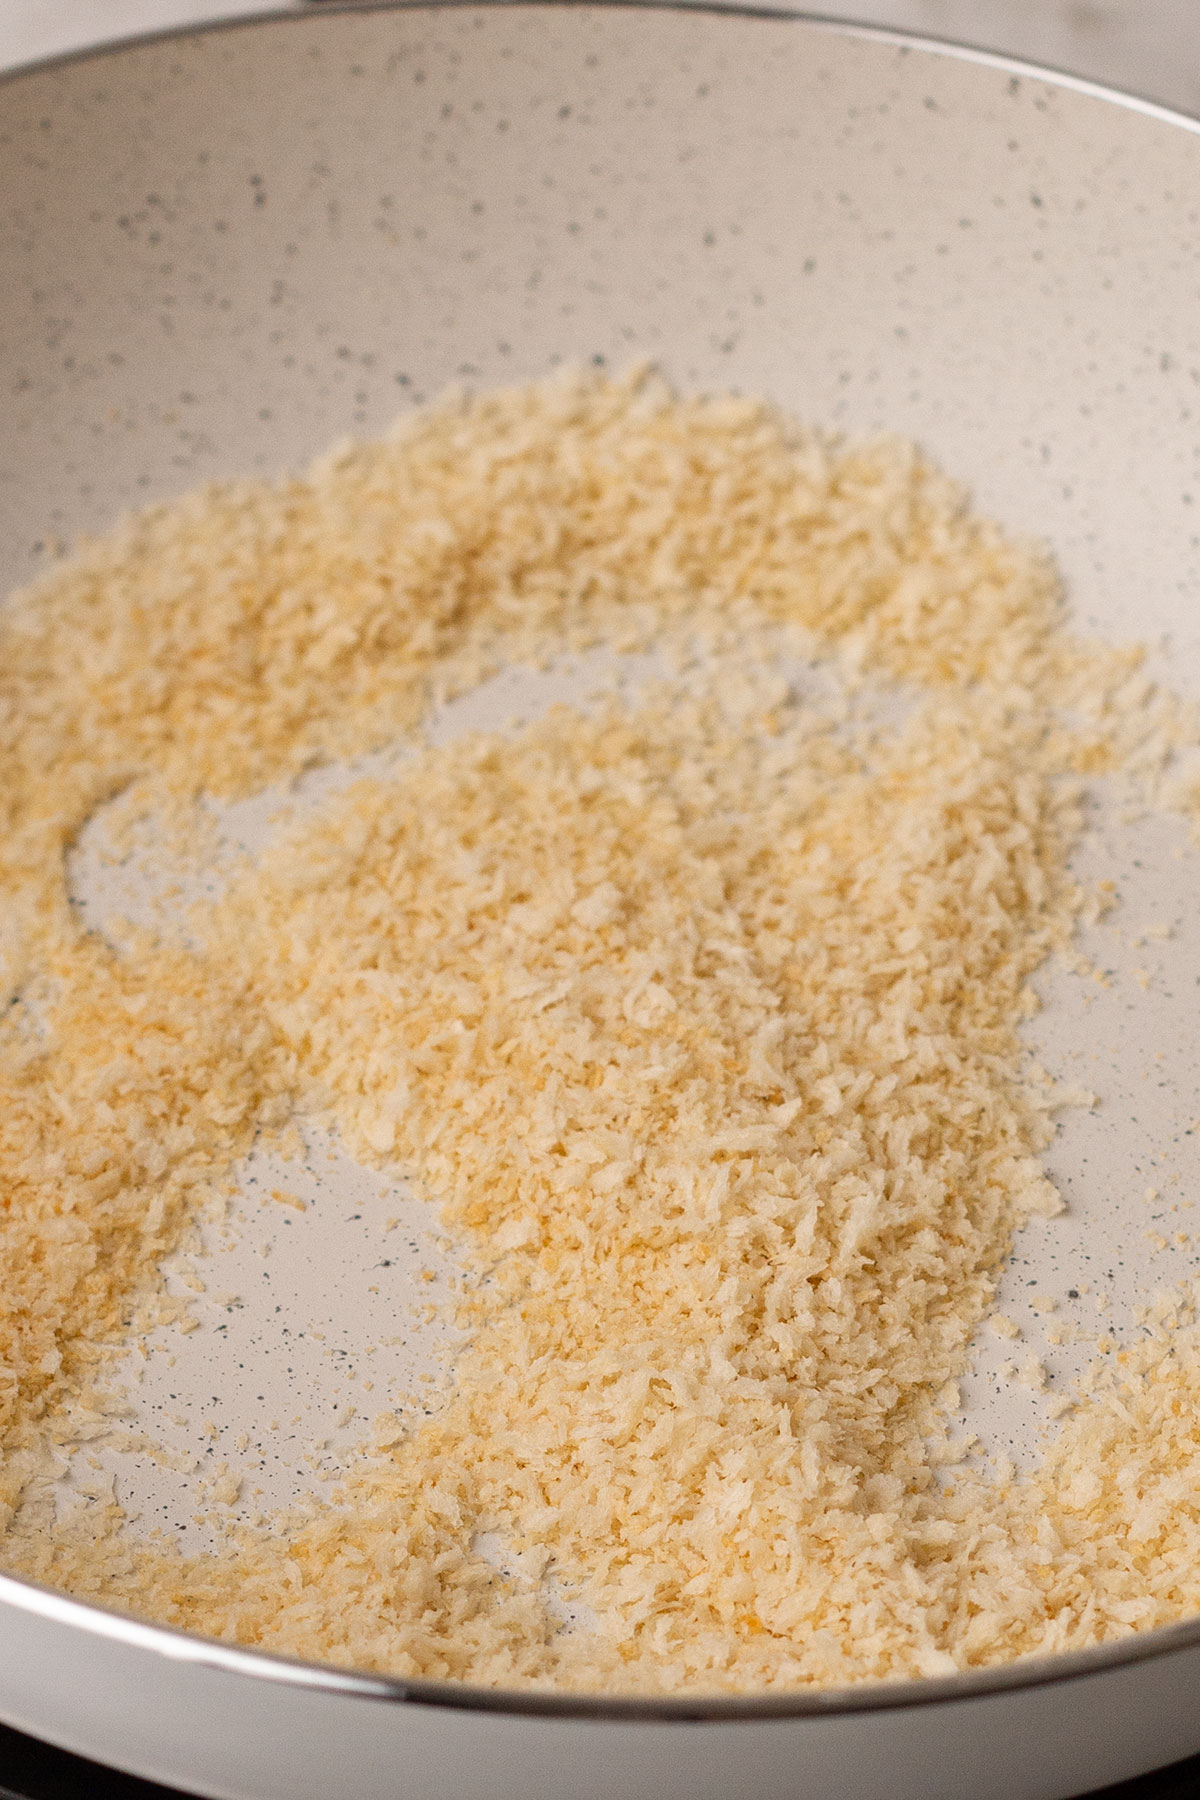 The panko breadcrumbs in a skillet ready for toasting,